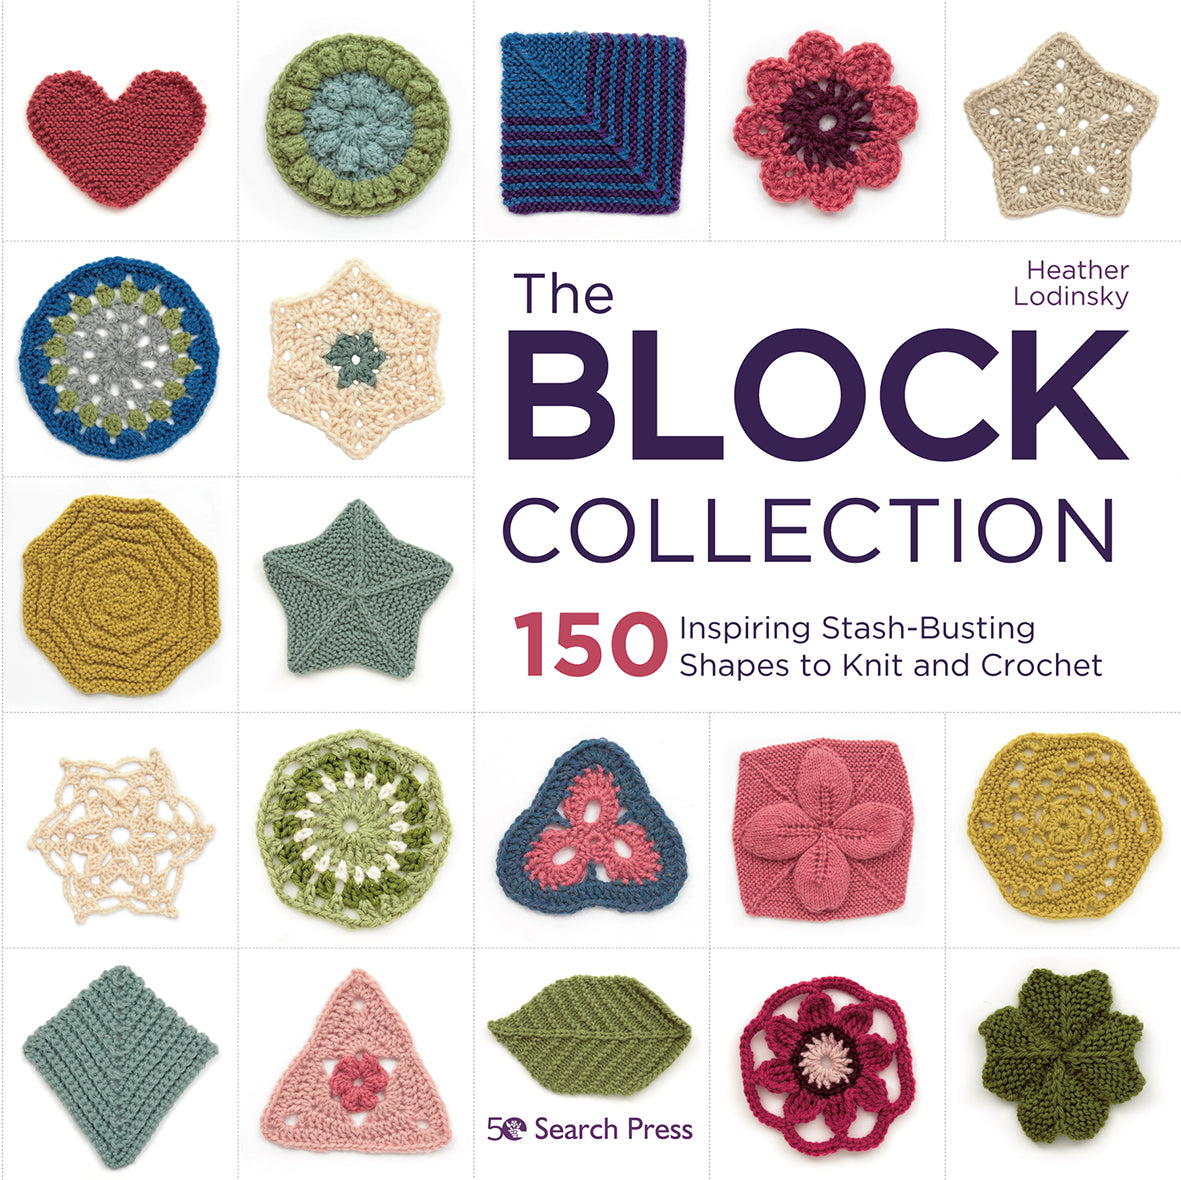 The Block Collection | Heather Lodinsky